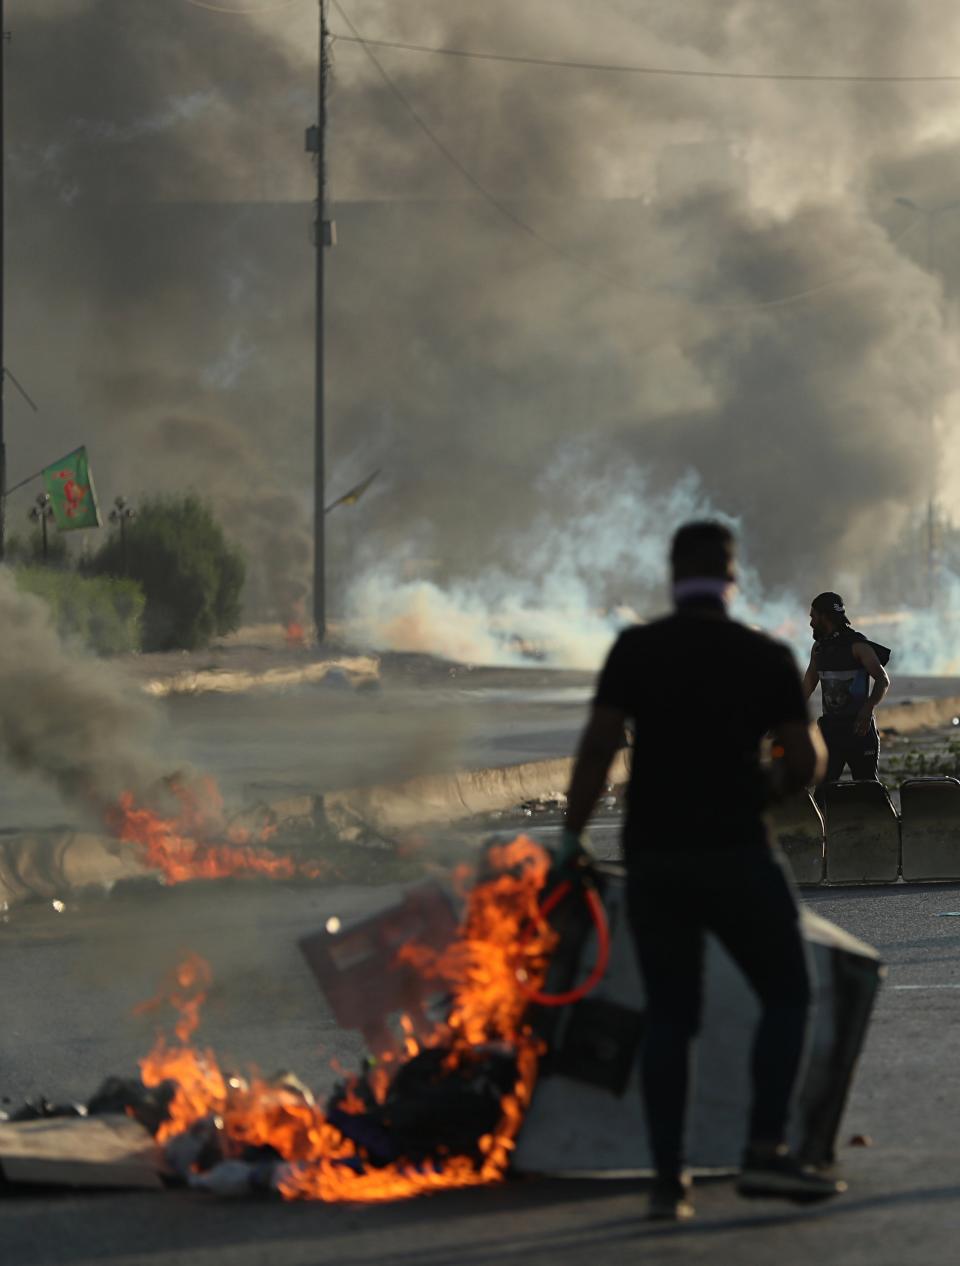 Anti-government protesters set fires and close a street during a demonstration in Baghdad, Iraq, Saturday, Oct. 5, 2019. Iraqi protesters pressed on with angry anti-government rallies across several provinces, in some cases torching party offices, for the fifth day, ignoring appeals for calm from political and religious leaders. Security agencies kept up their heavy crackdown, firing live ammunition and killing more than 14 protesters Saturday. (AP Photo/Hadi Mizban)